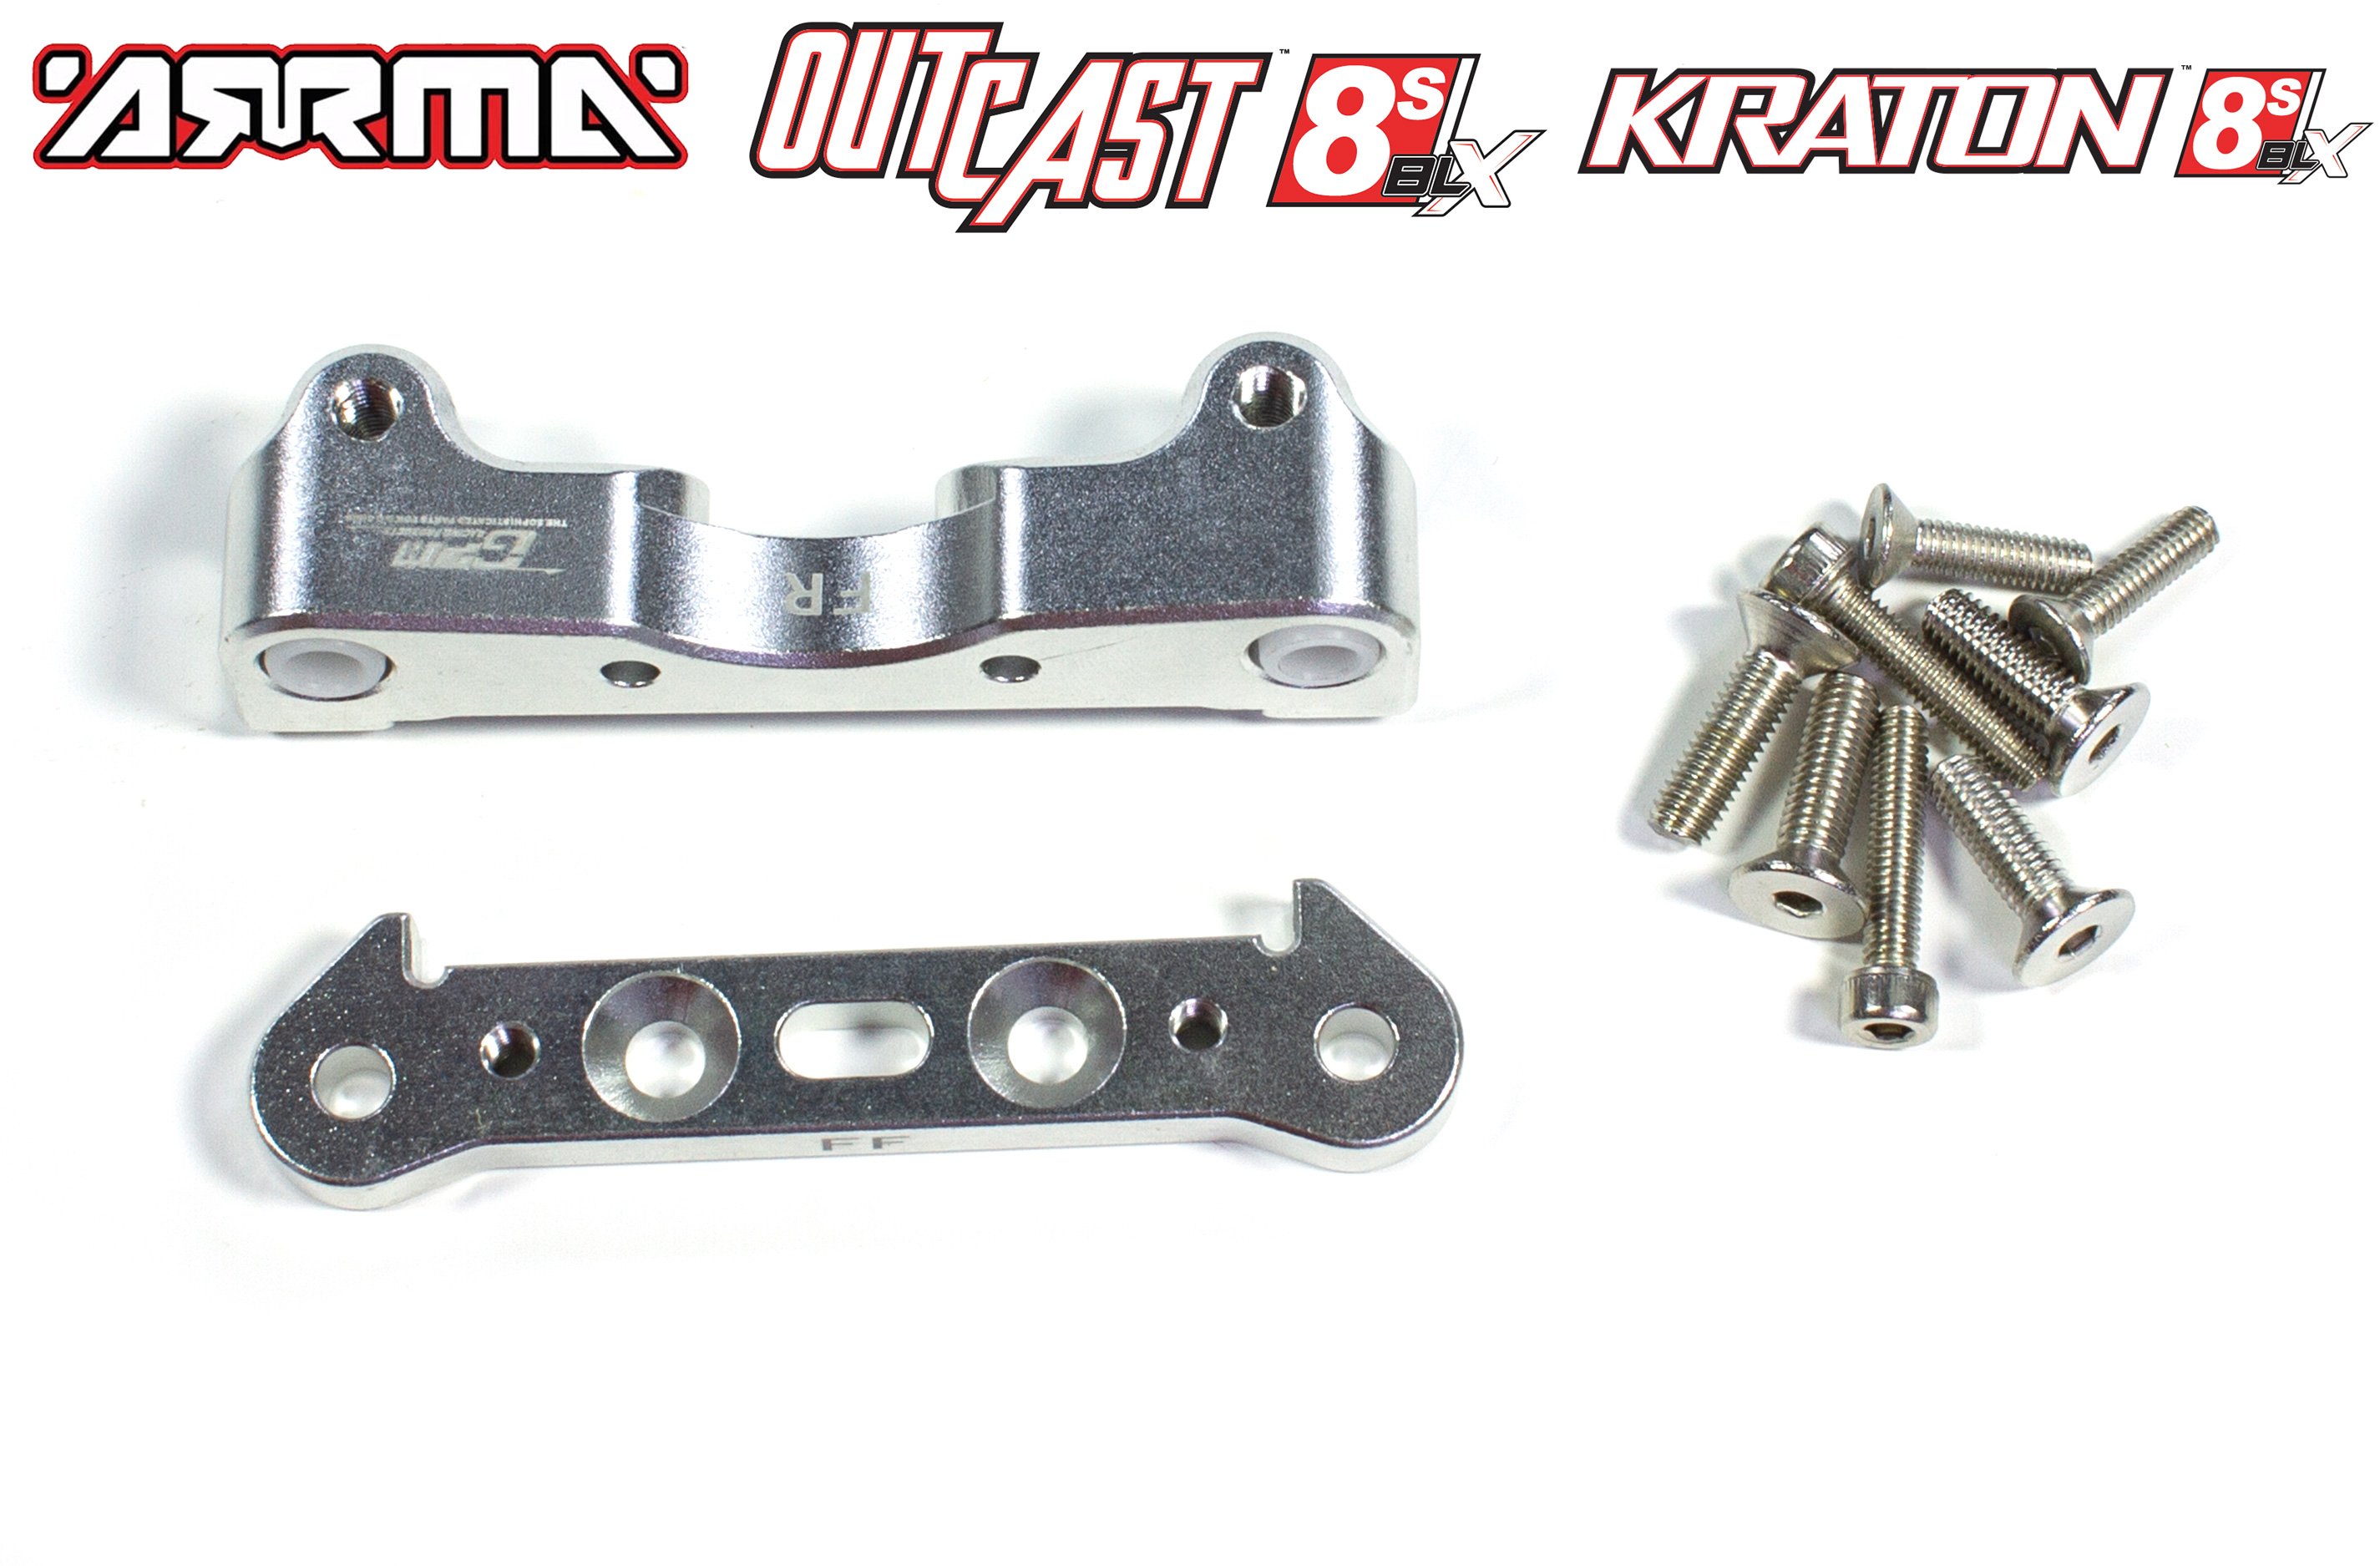 AKX008 GPM aluminum hinge pin brackets front suspension, lower, for Arrma Kraton / Outcast 8S